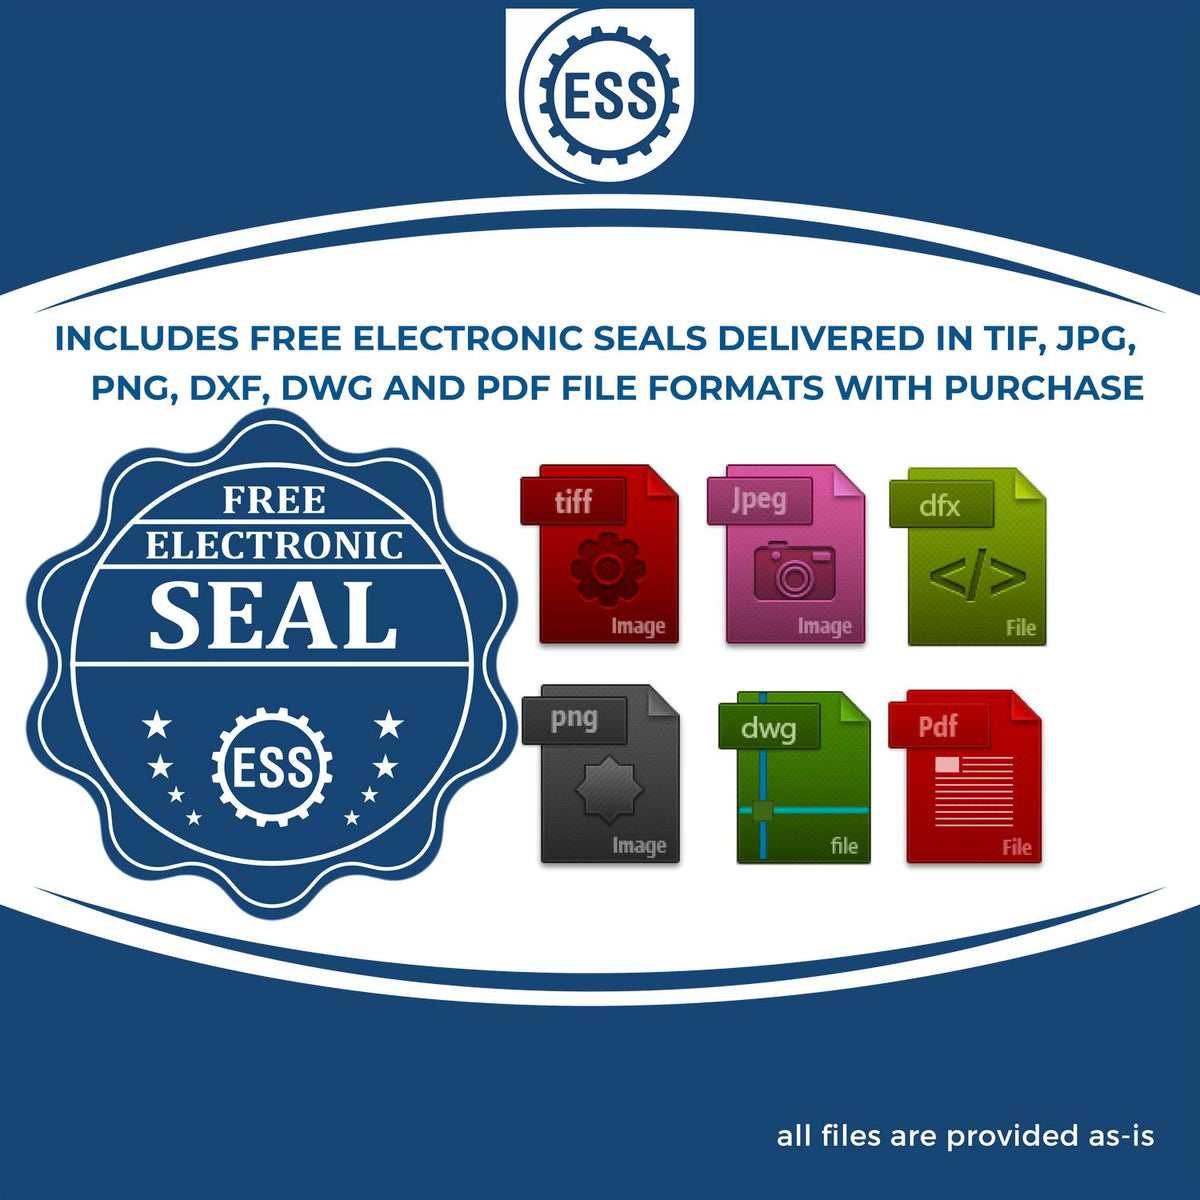 An infographic for the free electronic seal for the MaxLight Premium Pre-Inked Delaware State Seal Notarial Stamp illustrating the different file type icons such as DXF, DWG, TIF, JPG and PNG.